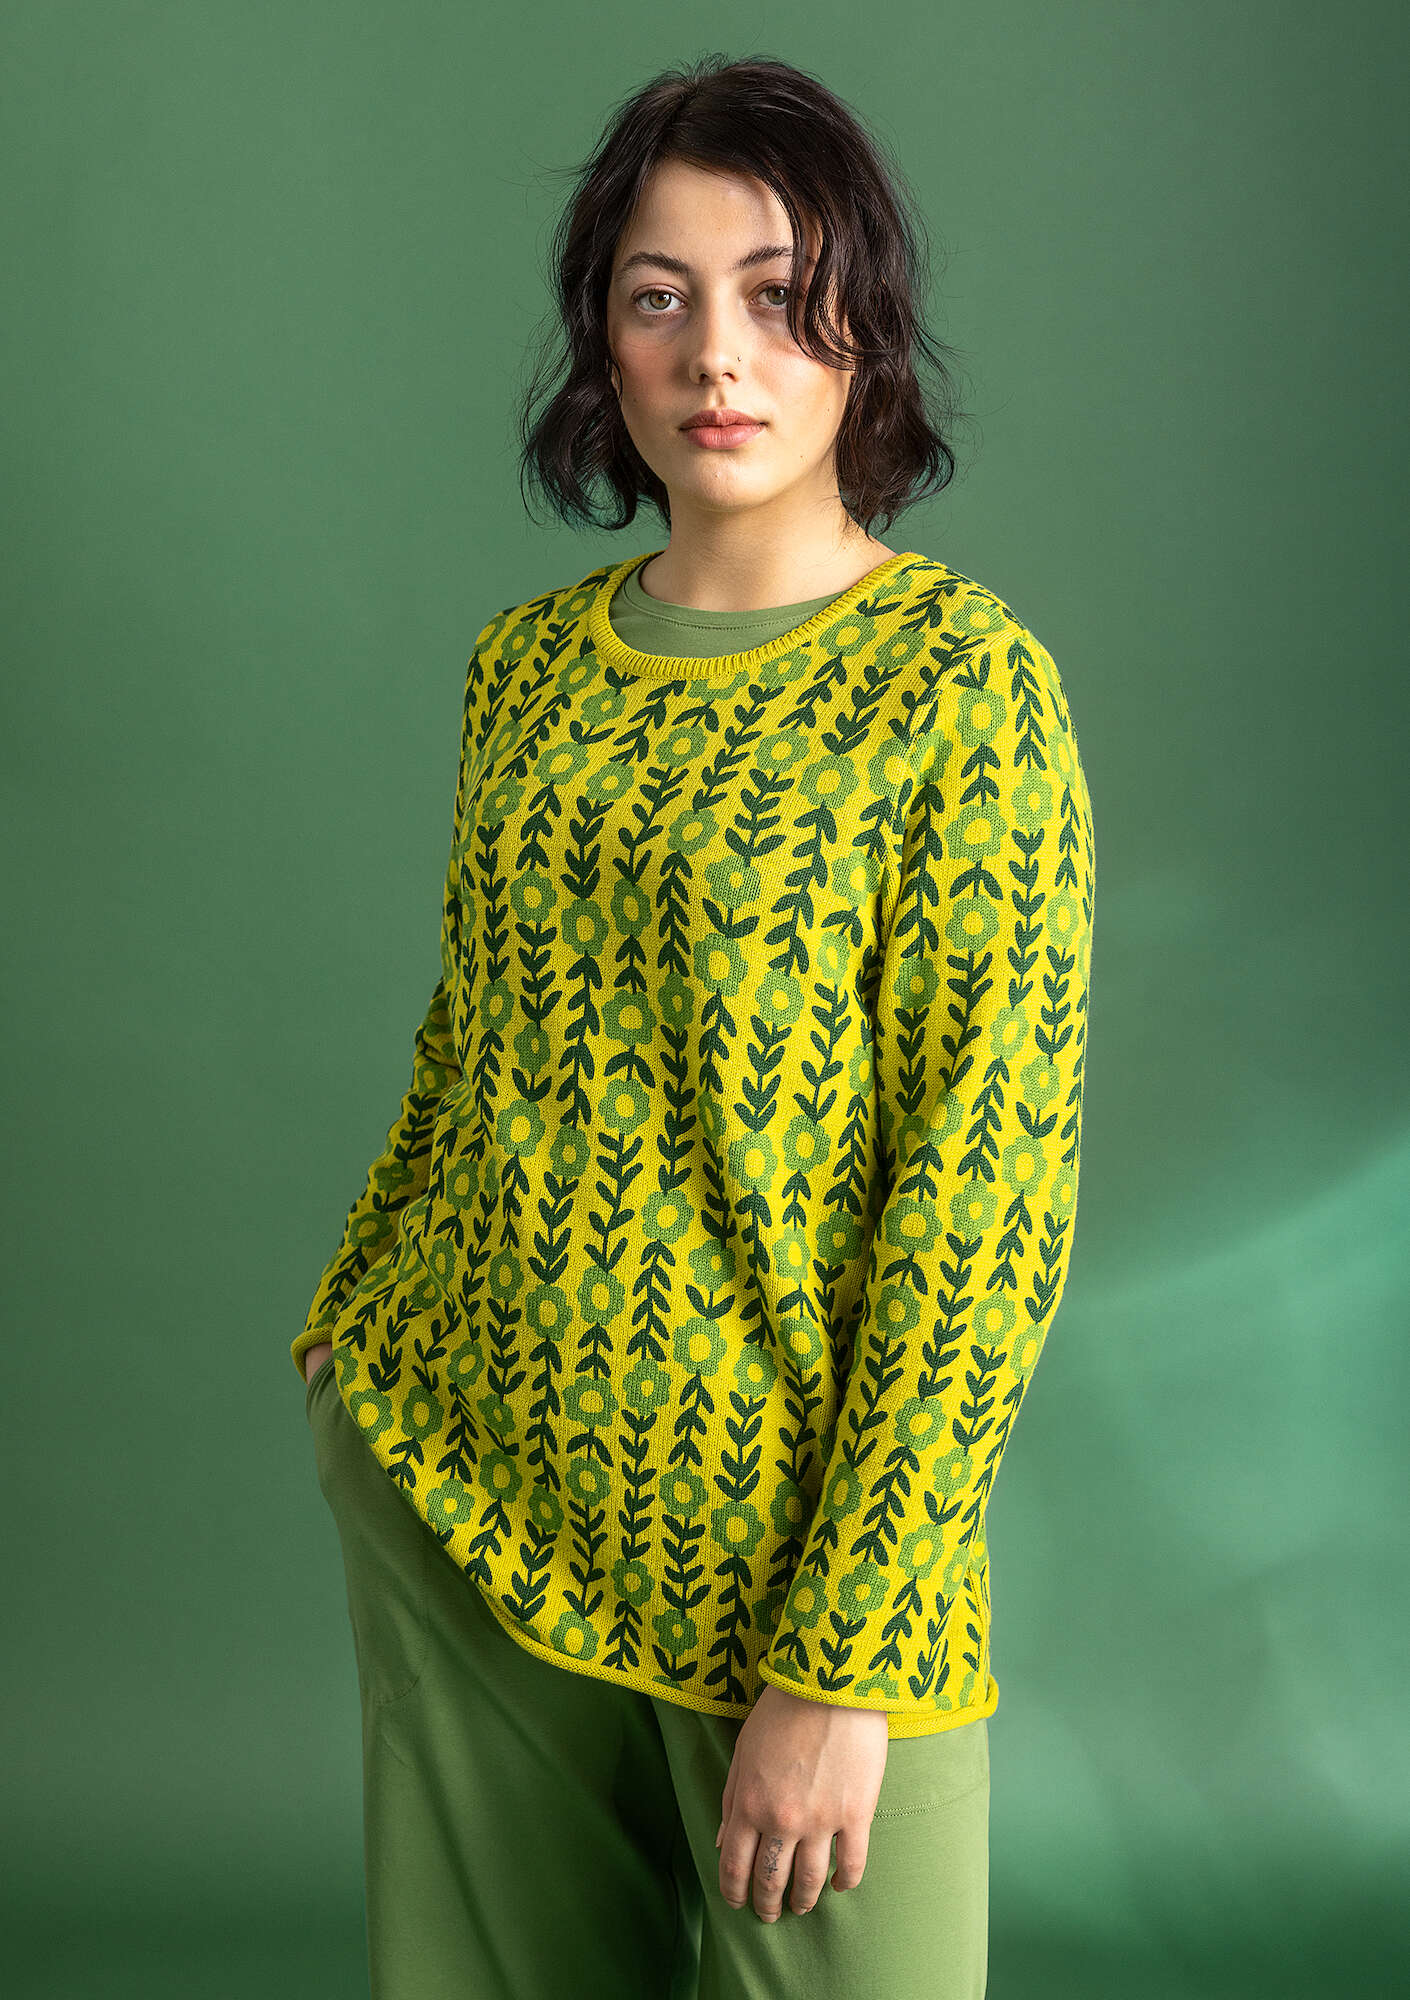 Jasmine sweater lime green/patterned